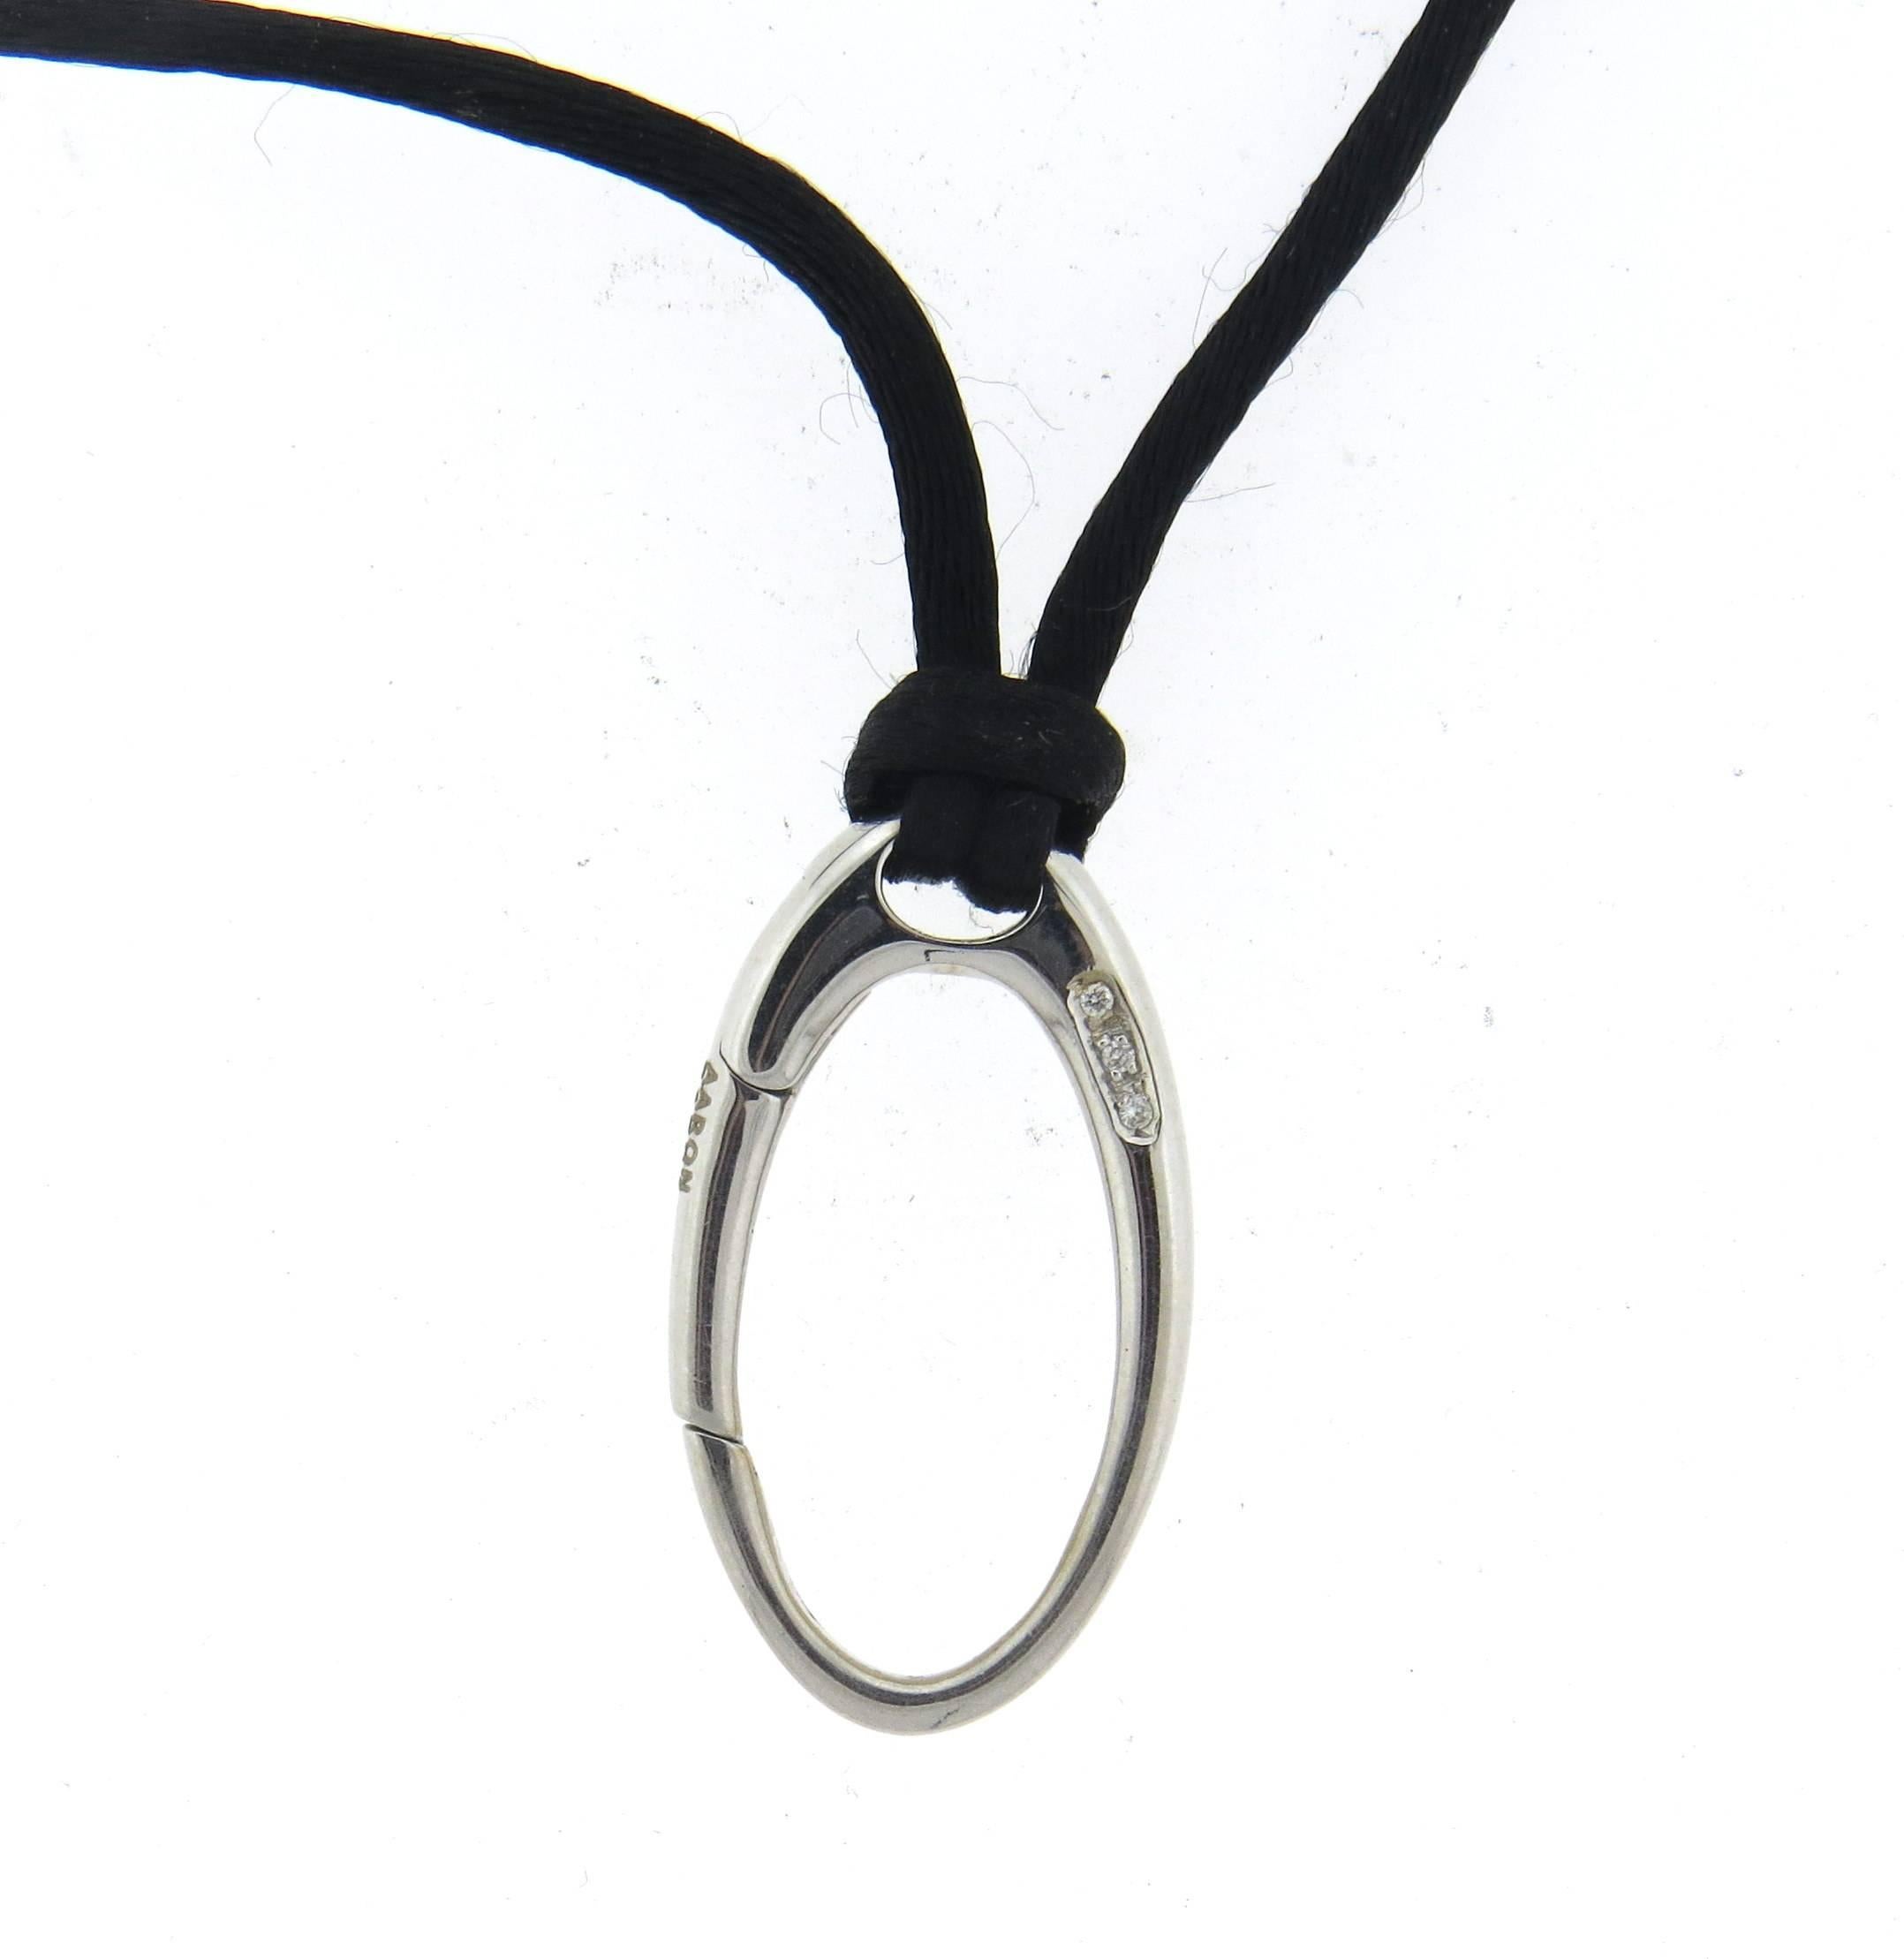 18k white gold charm pendant, suspended on a black silk cord, crafted by Aaron Basha, adorned with diamonds. Necklace is 16